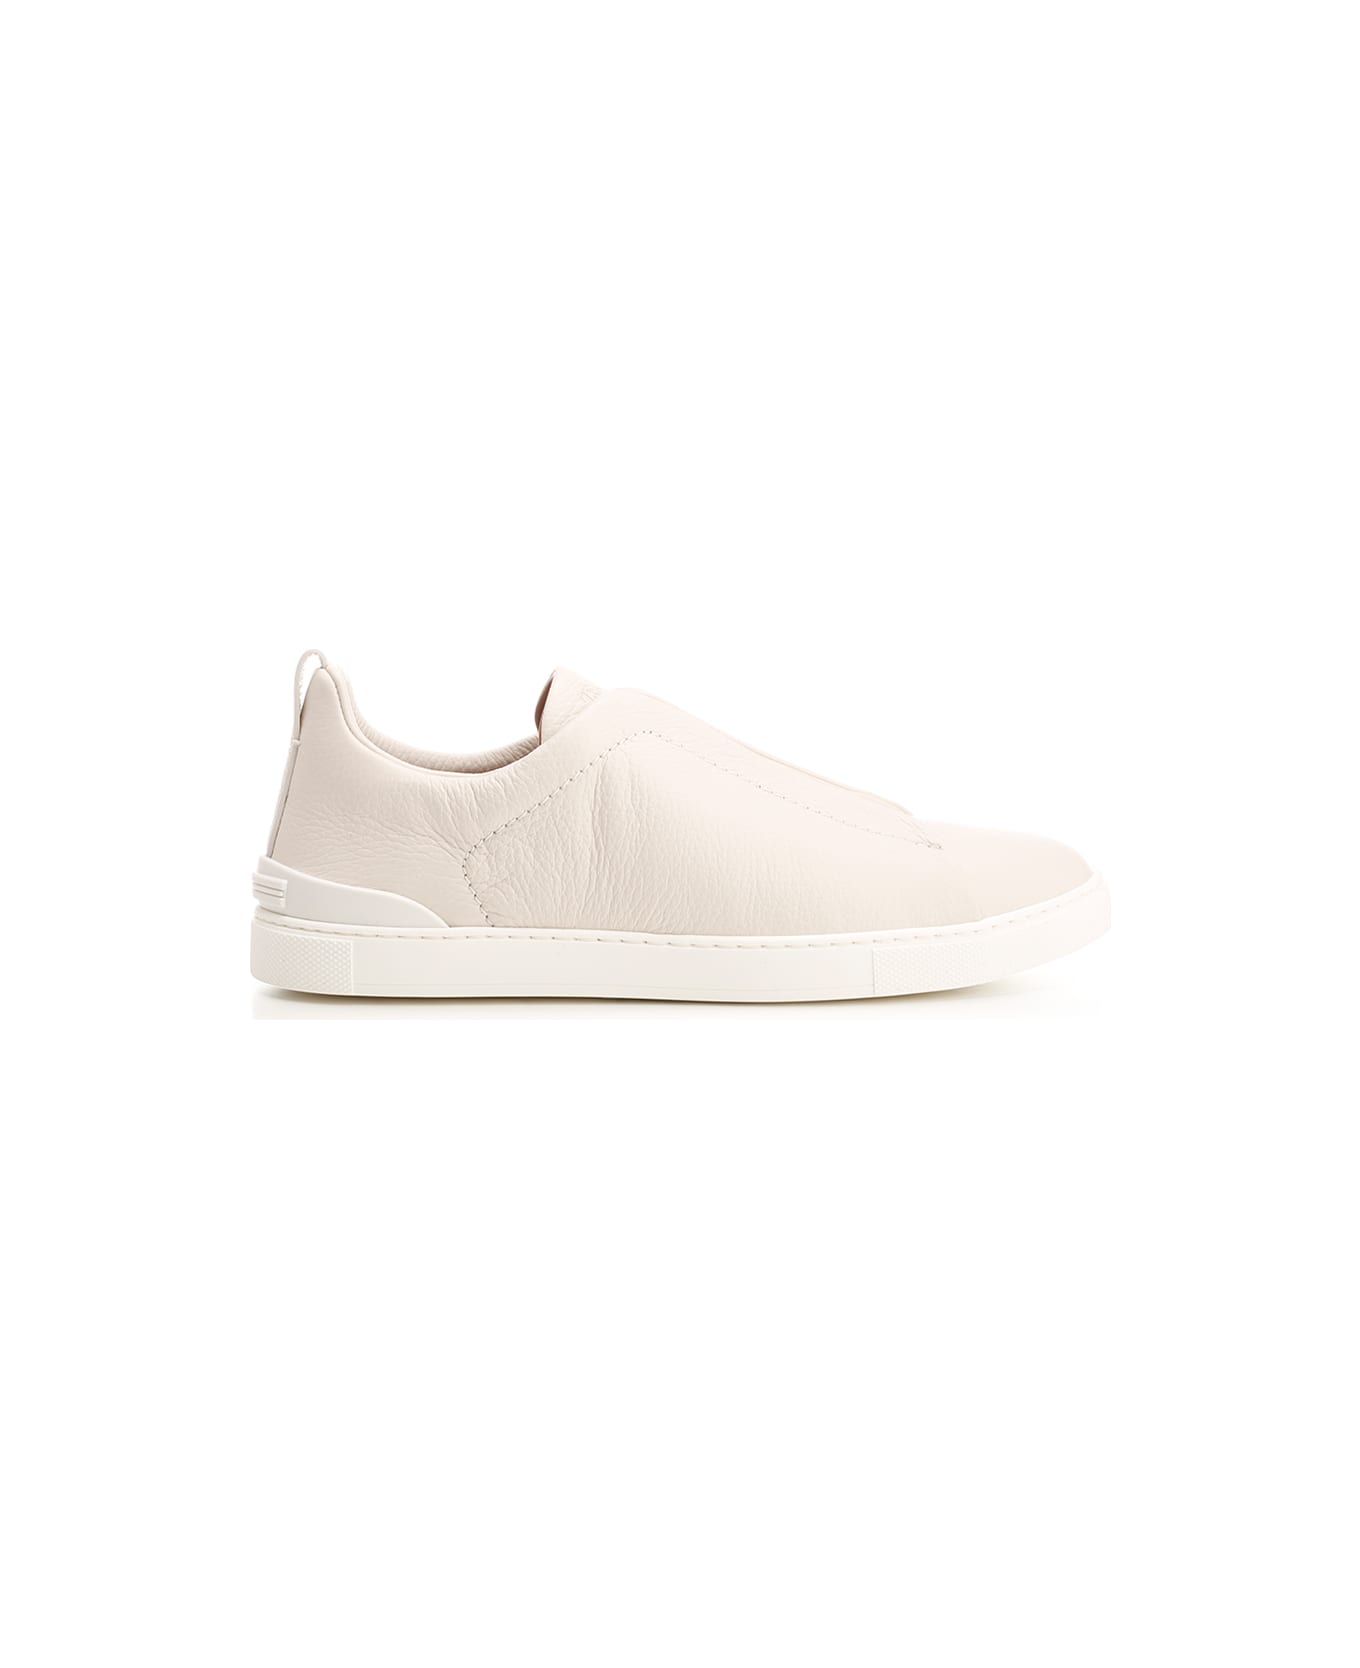 Zegna 'triple Stitch' Low Top Sneakers - White